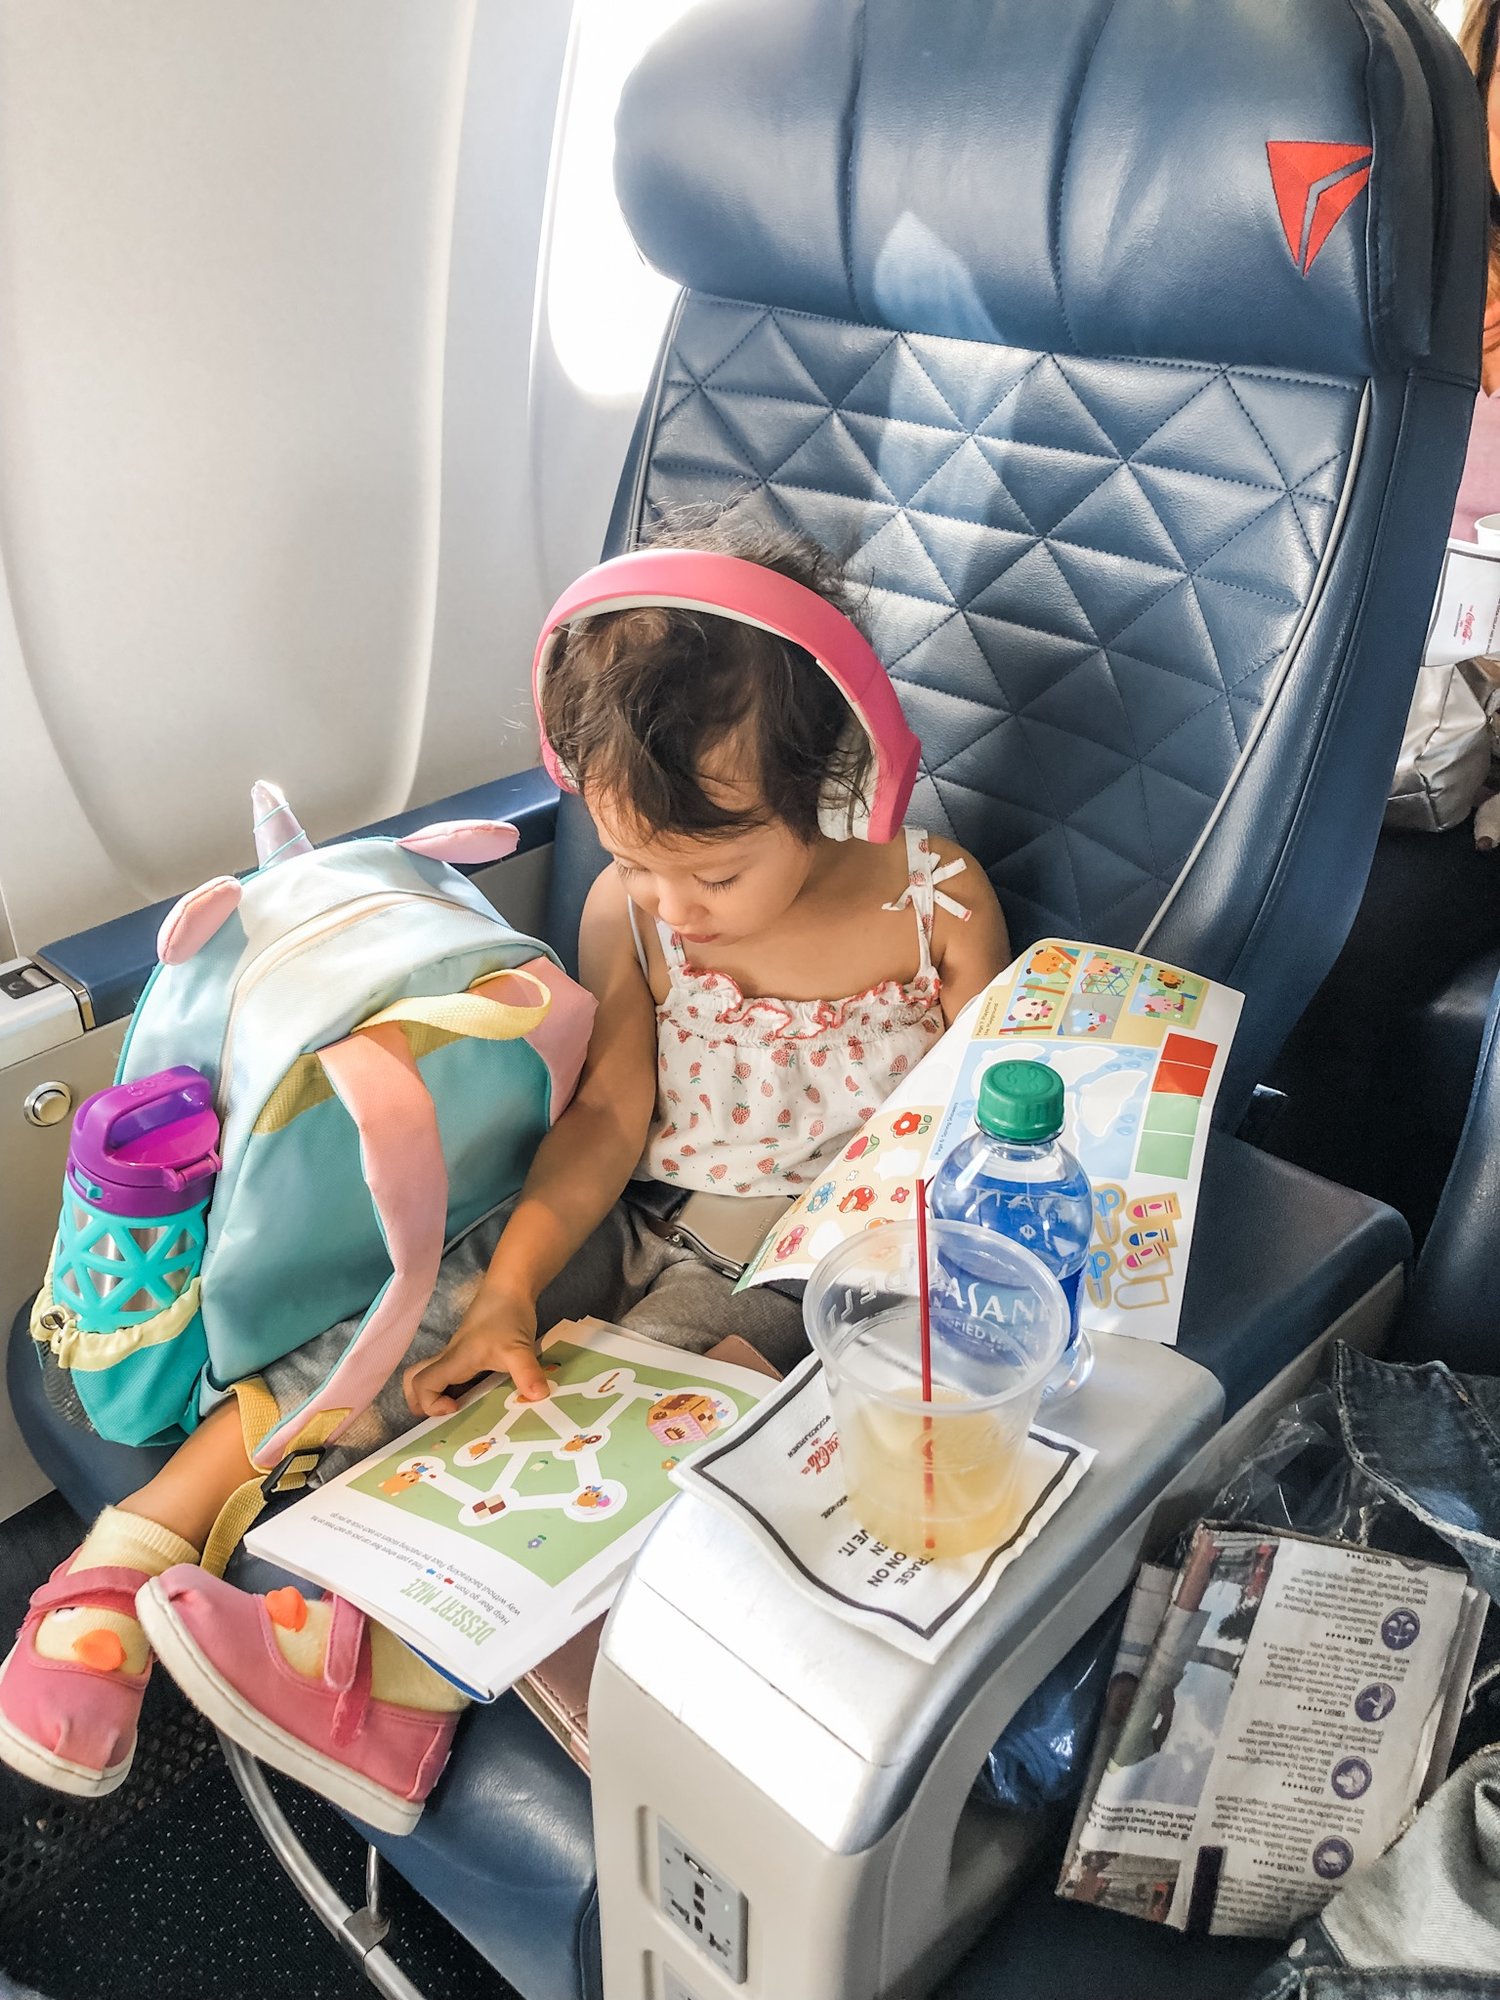 Toddler Airplane Essentials: What to Bring Onboard for Your 2-3